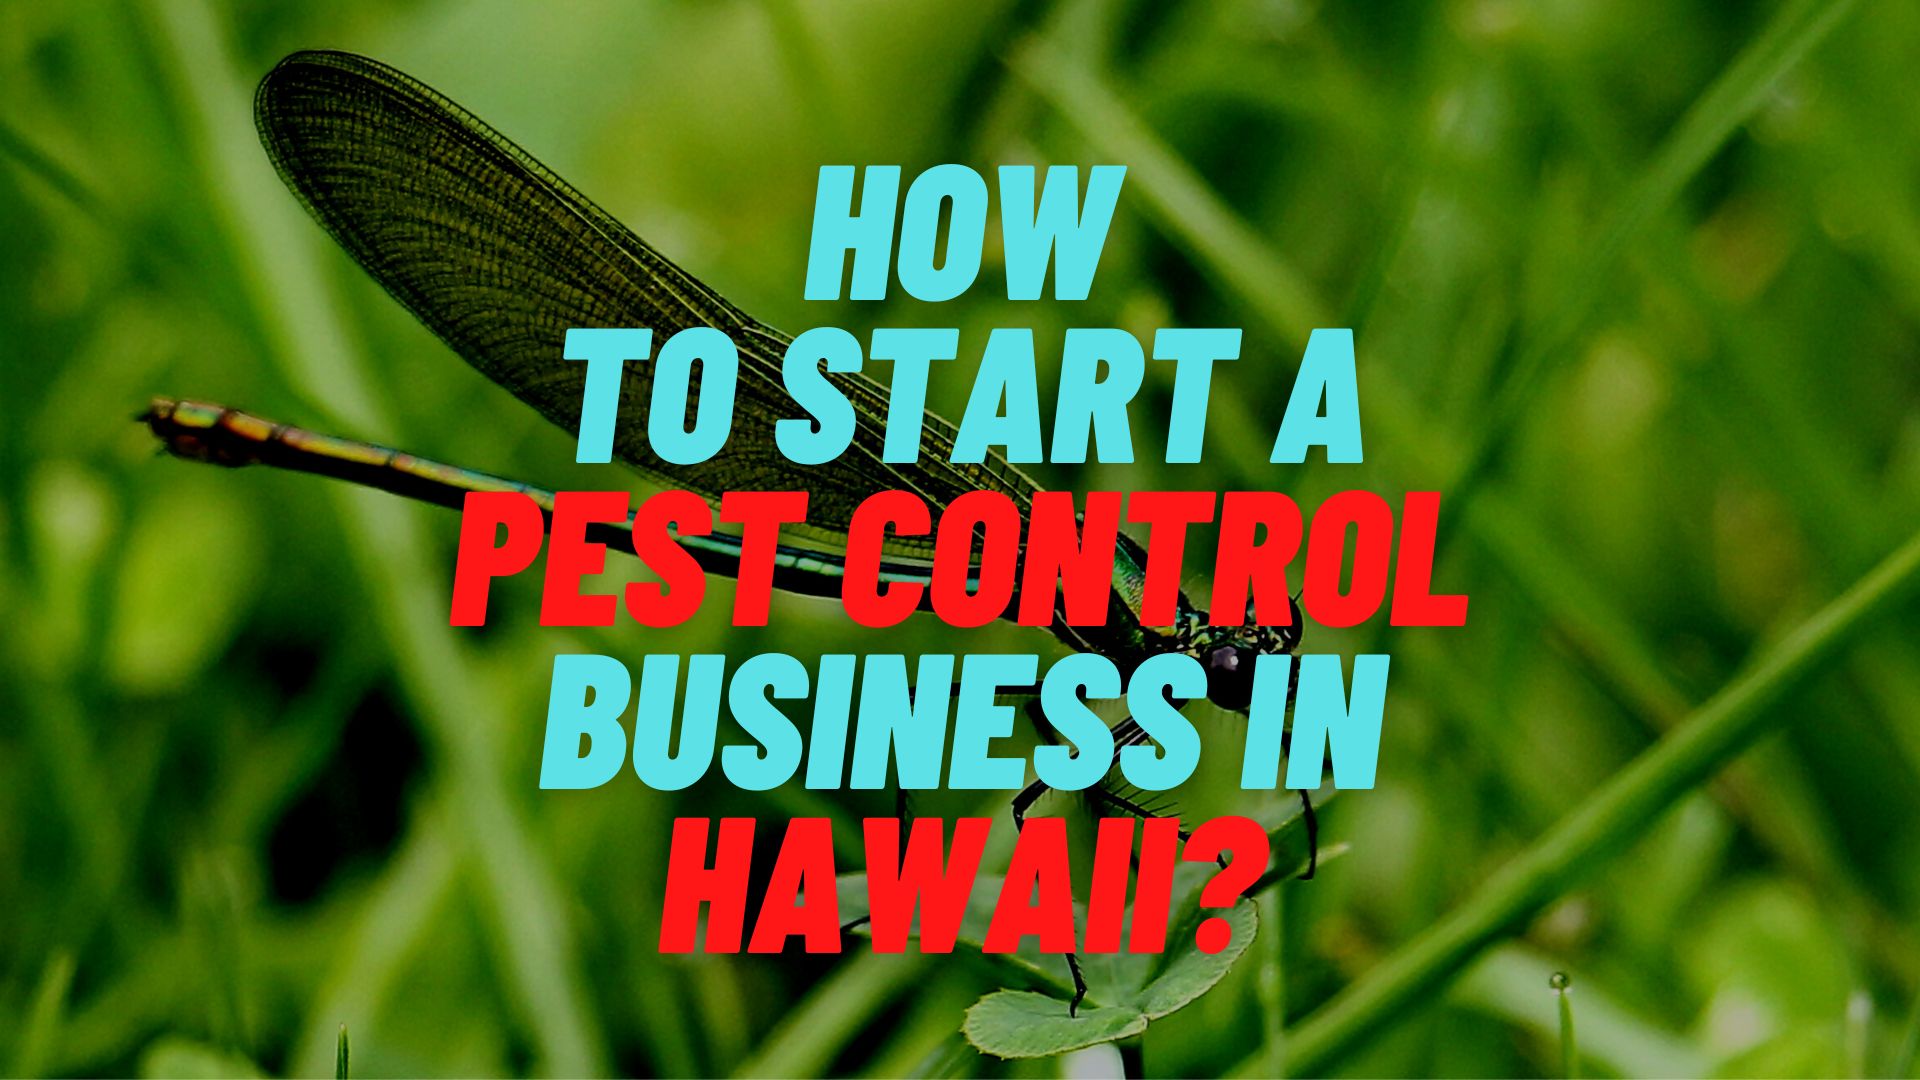 How to start a pest control business in Hawaii?